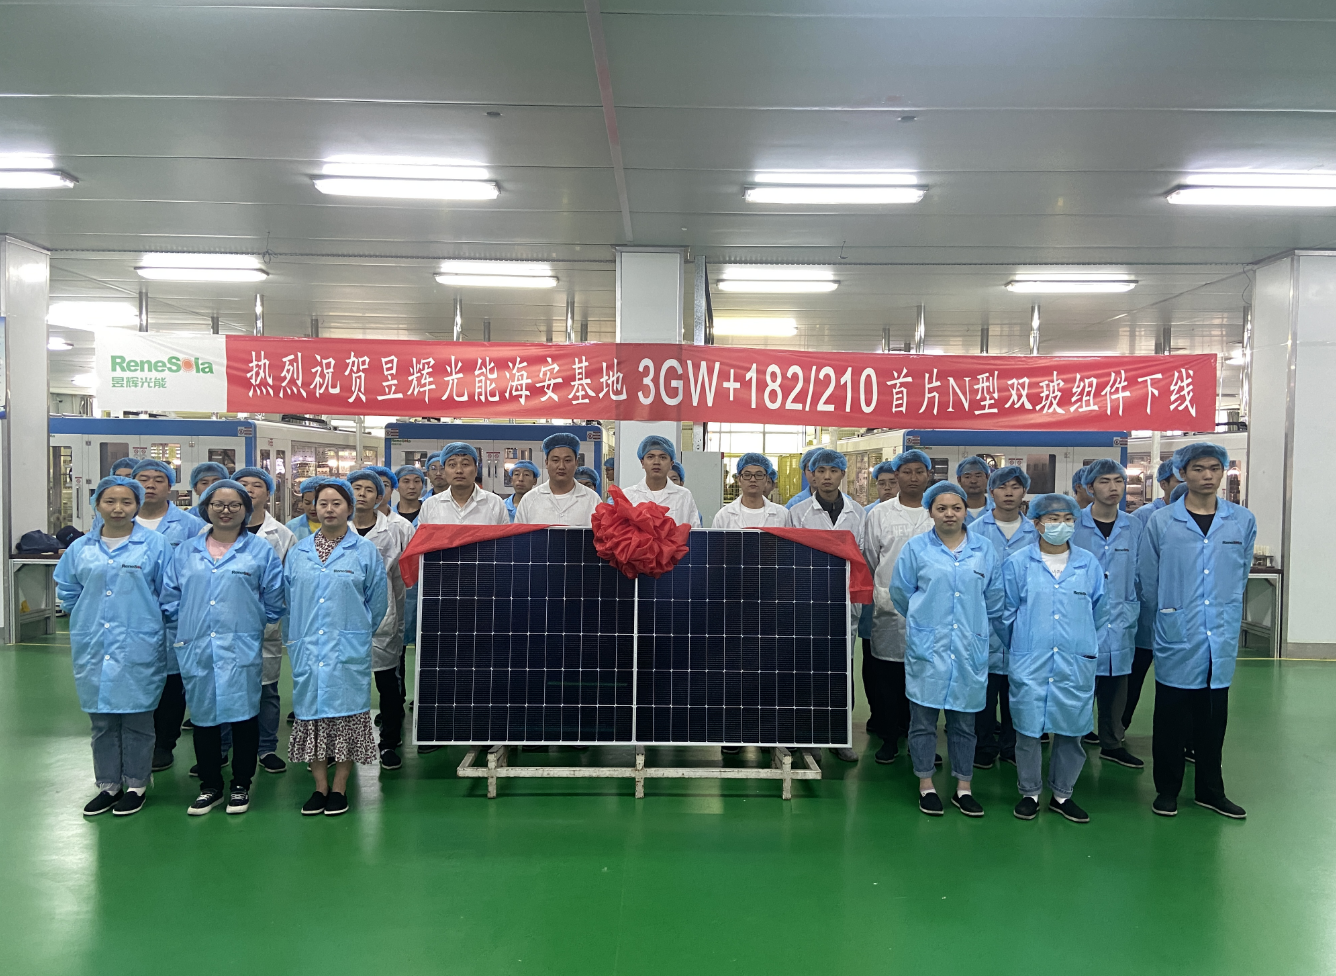 Renesola Haian Production Base 3GW +182/210 the first piece of N-type double glass solar module off the production line